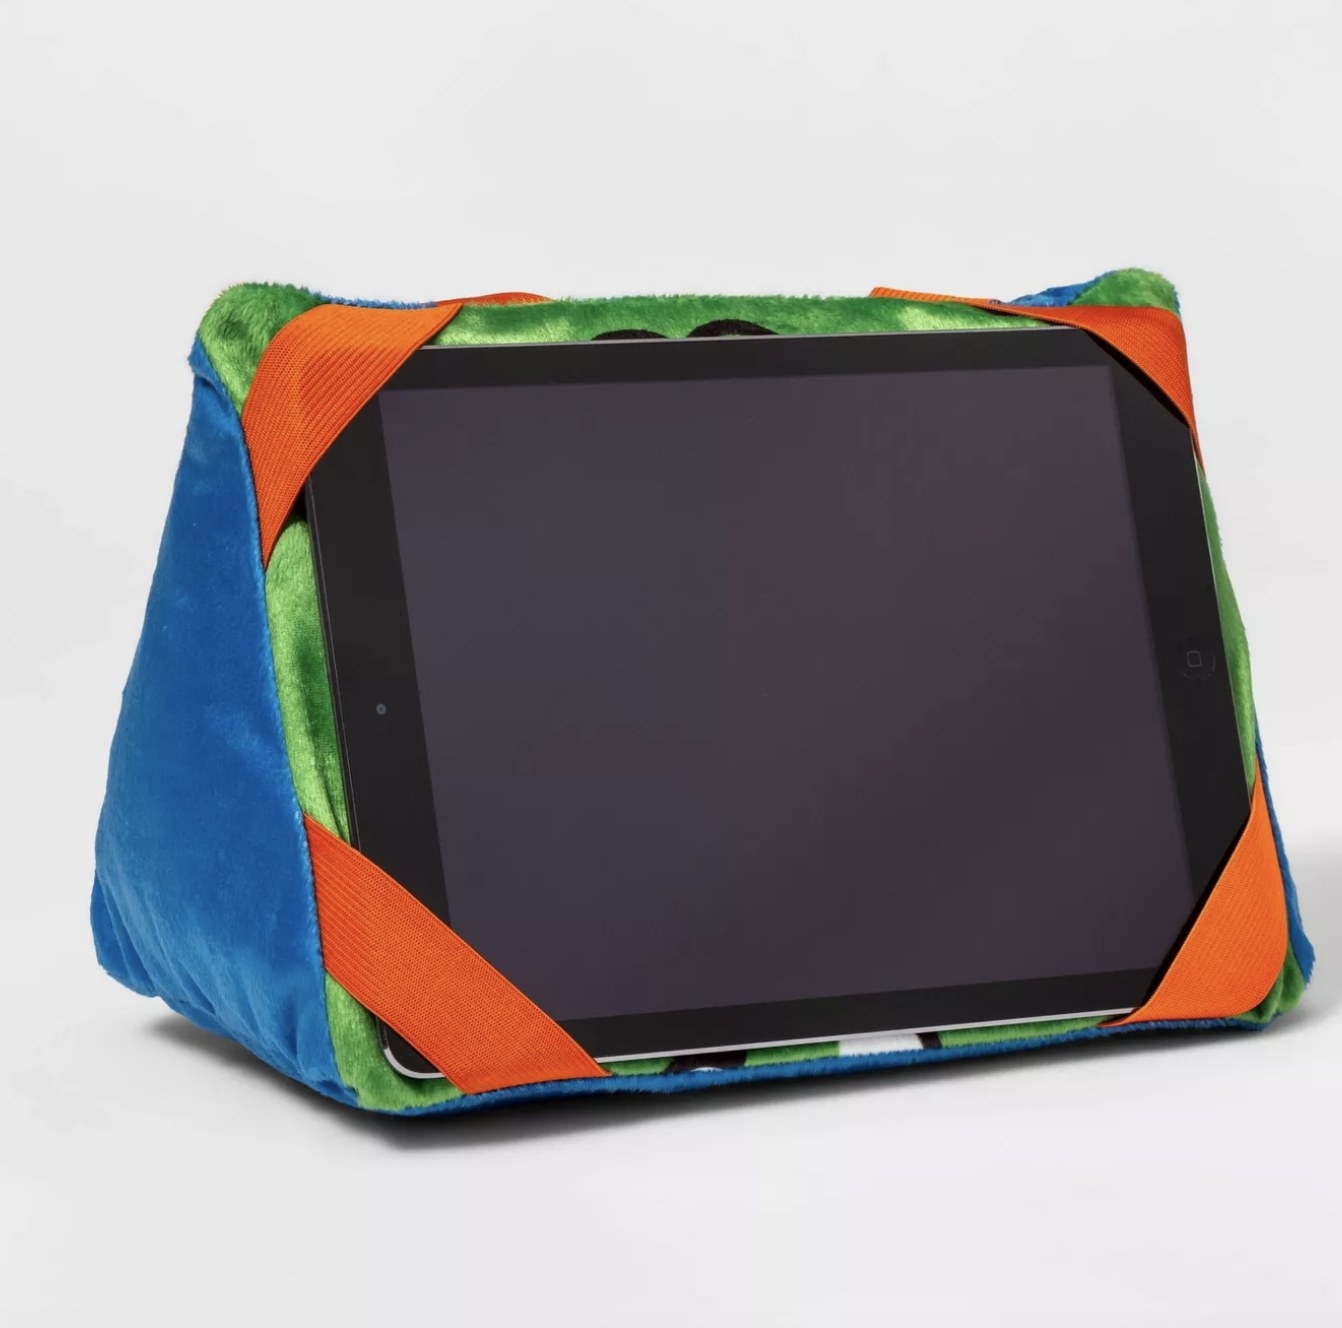 the pillow with an Ipad propped in it